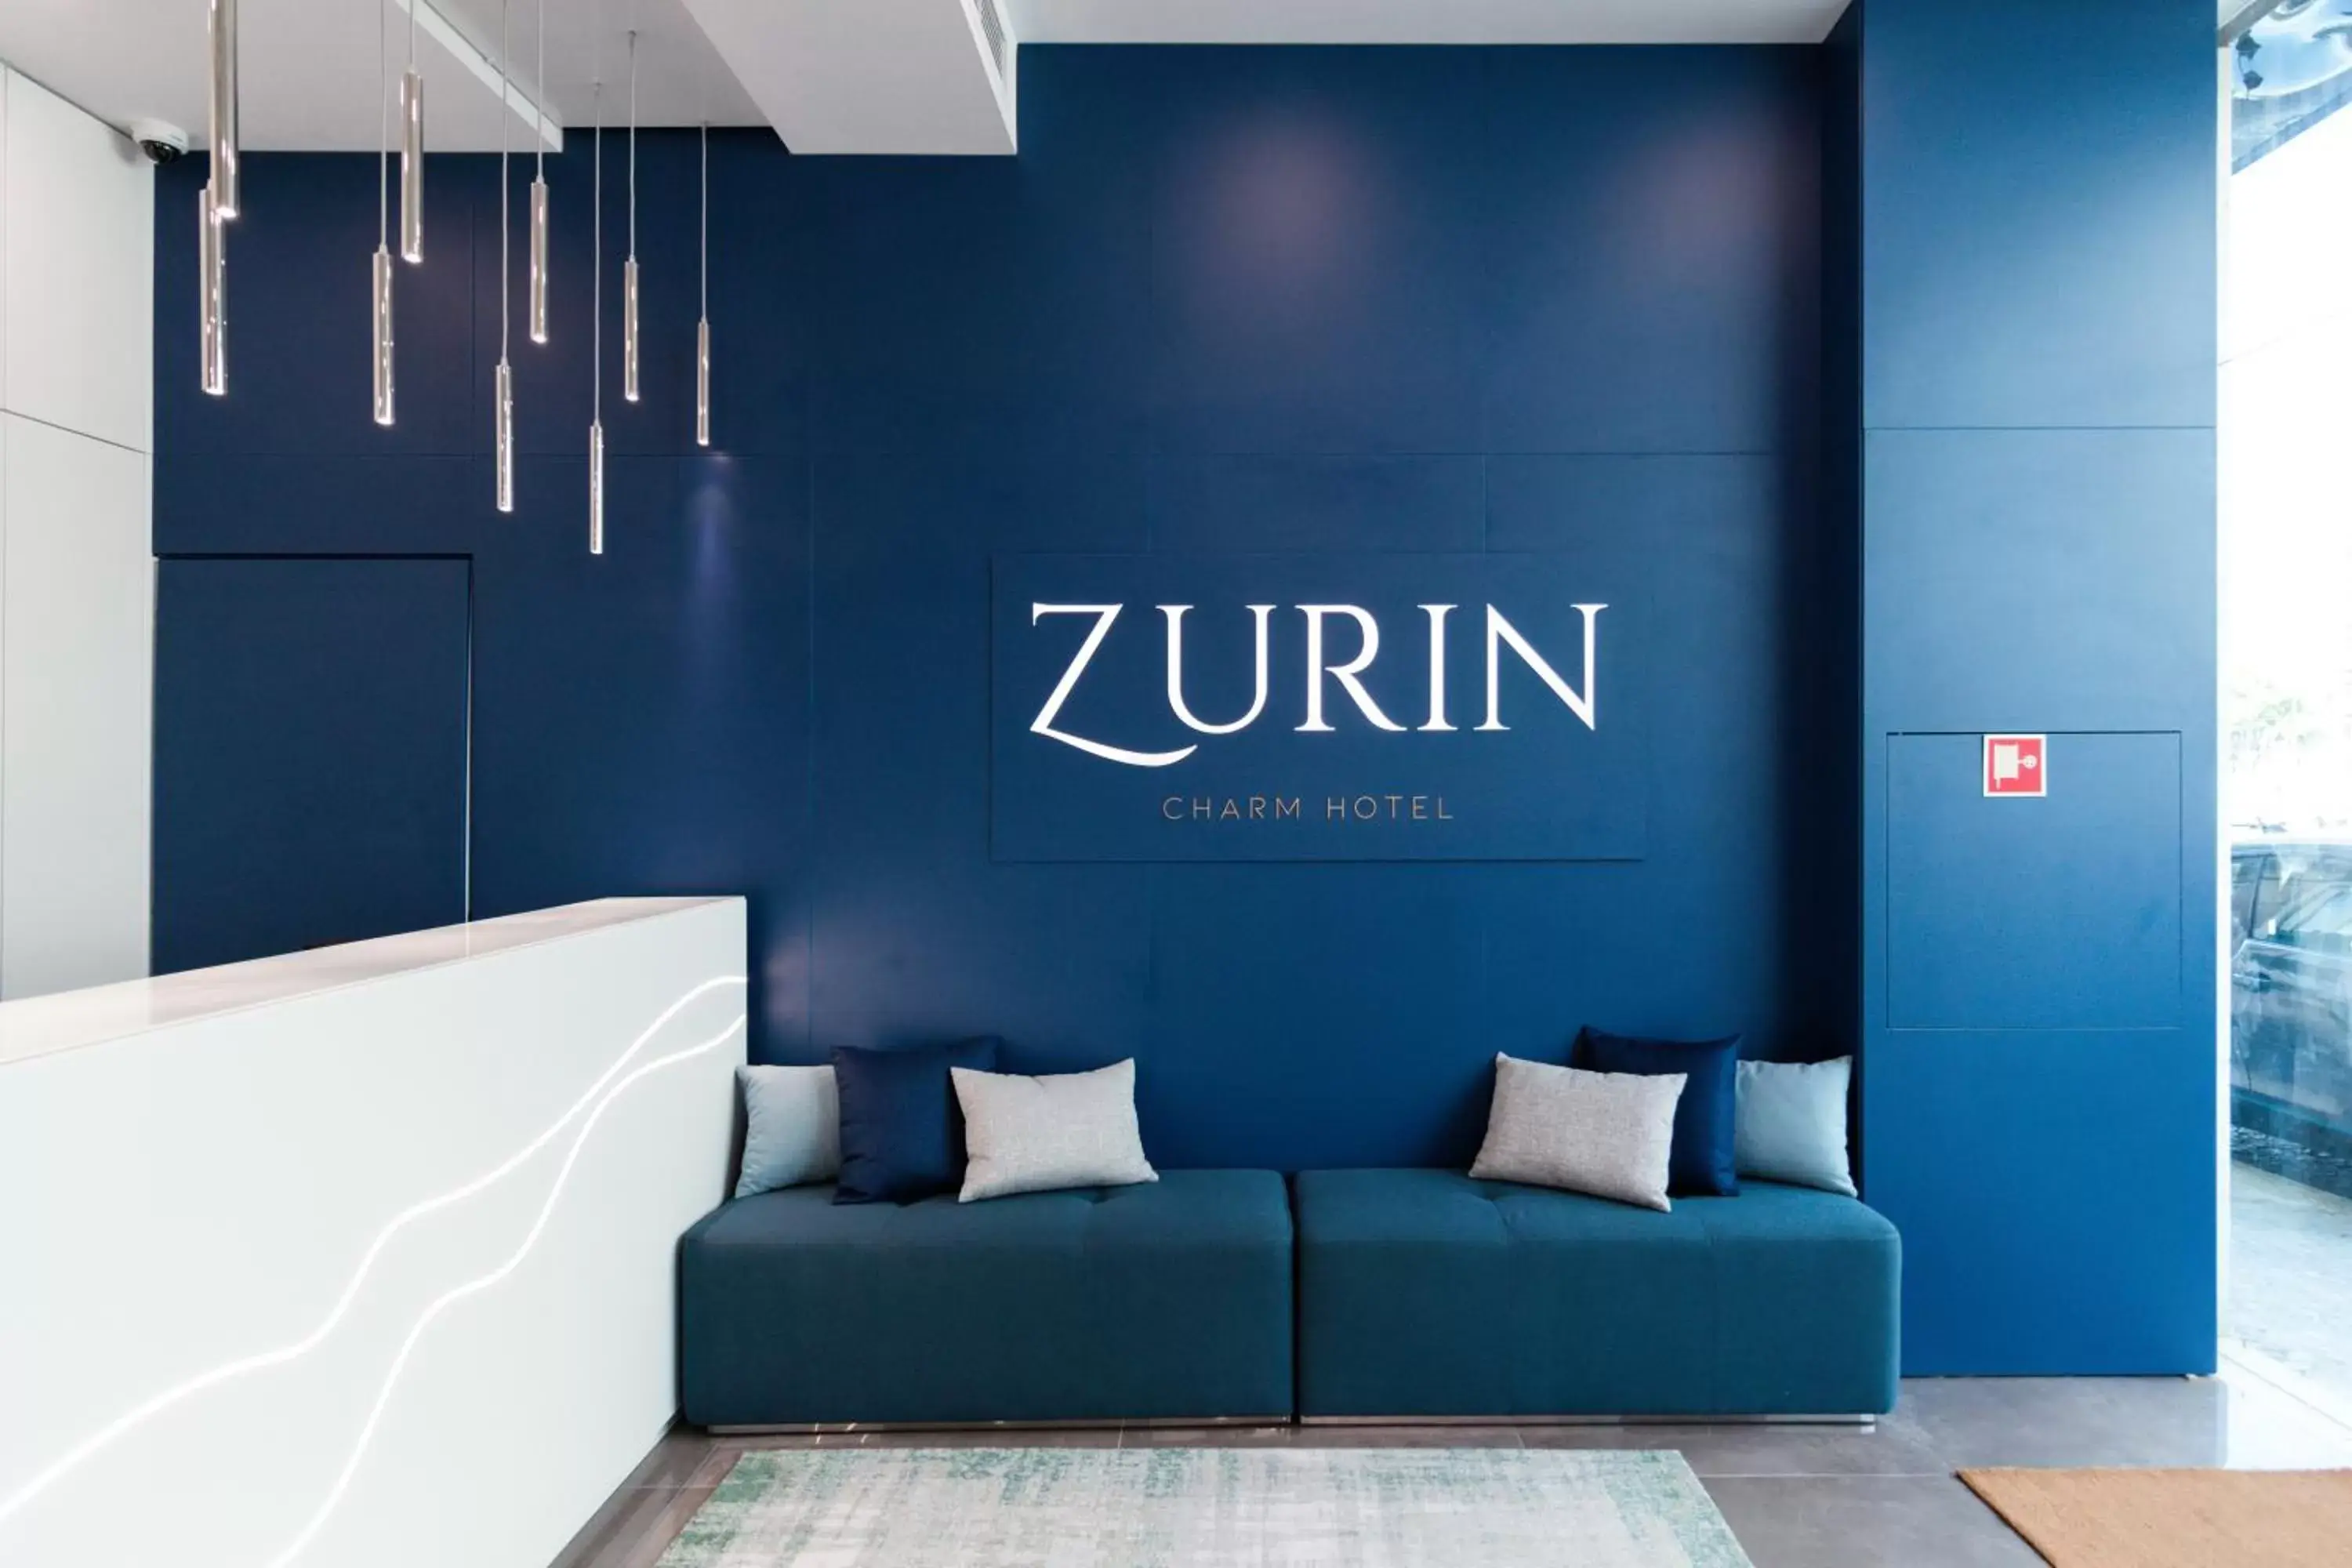 Property logo or sign in Zurin Charm Hotel